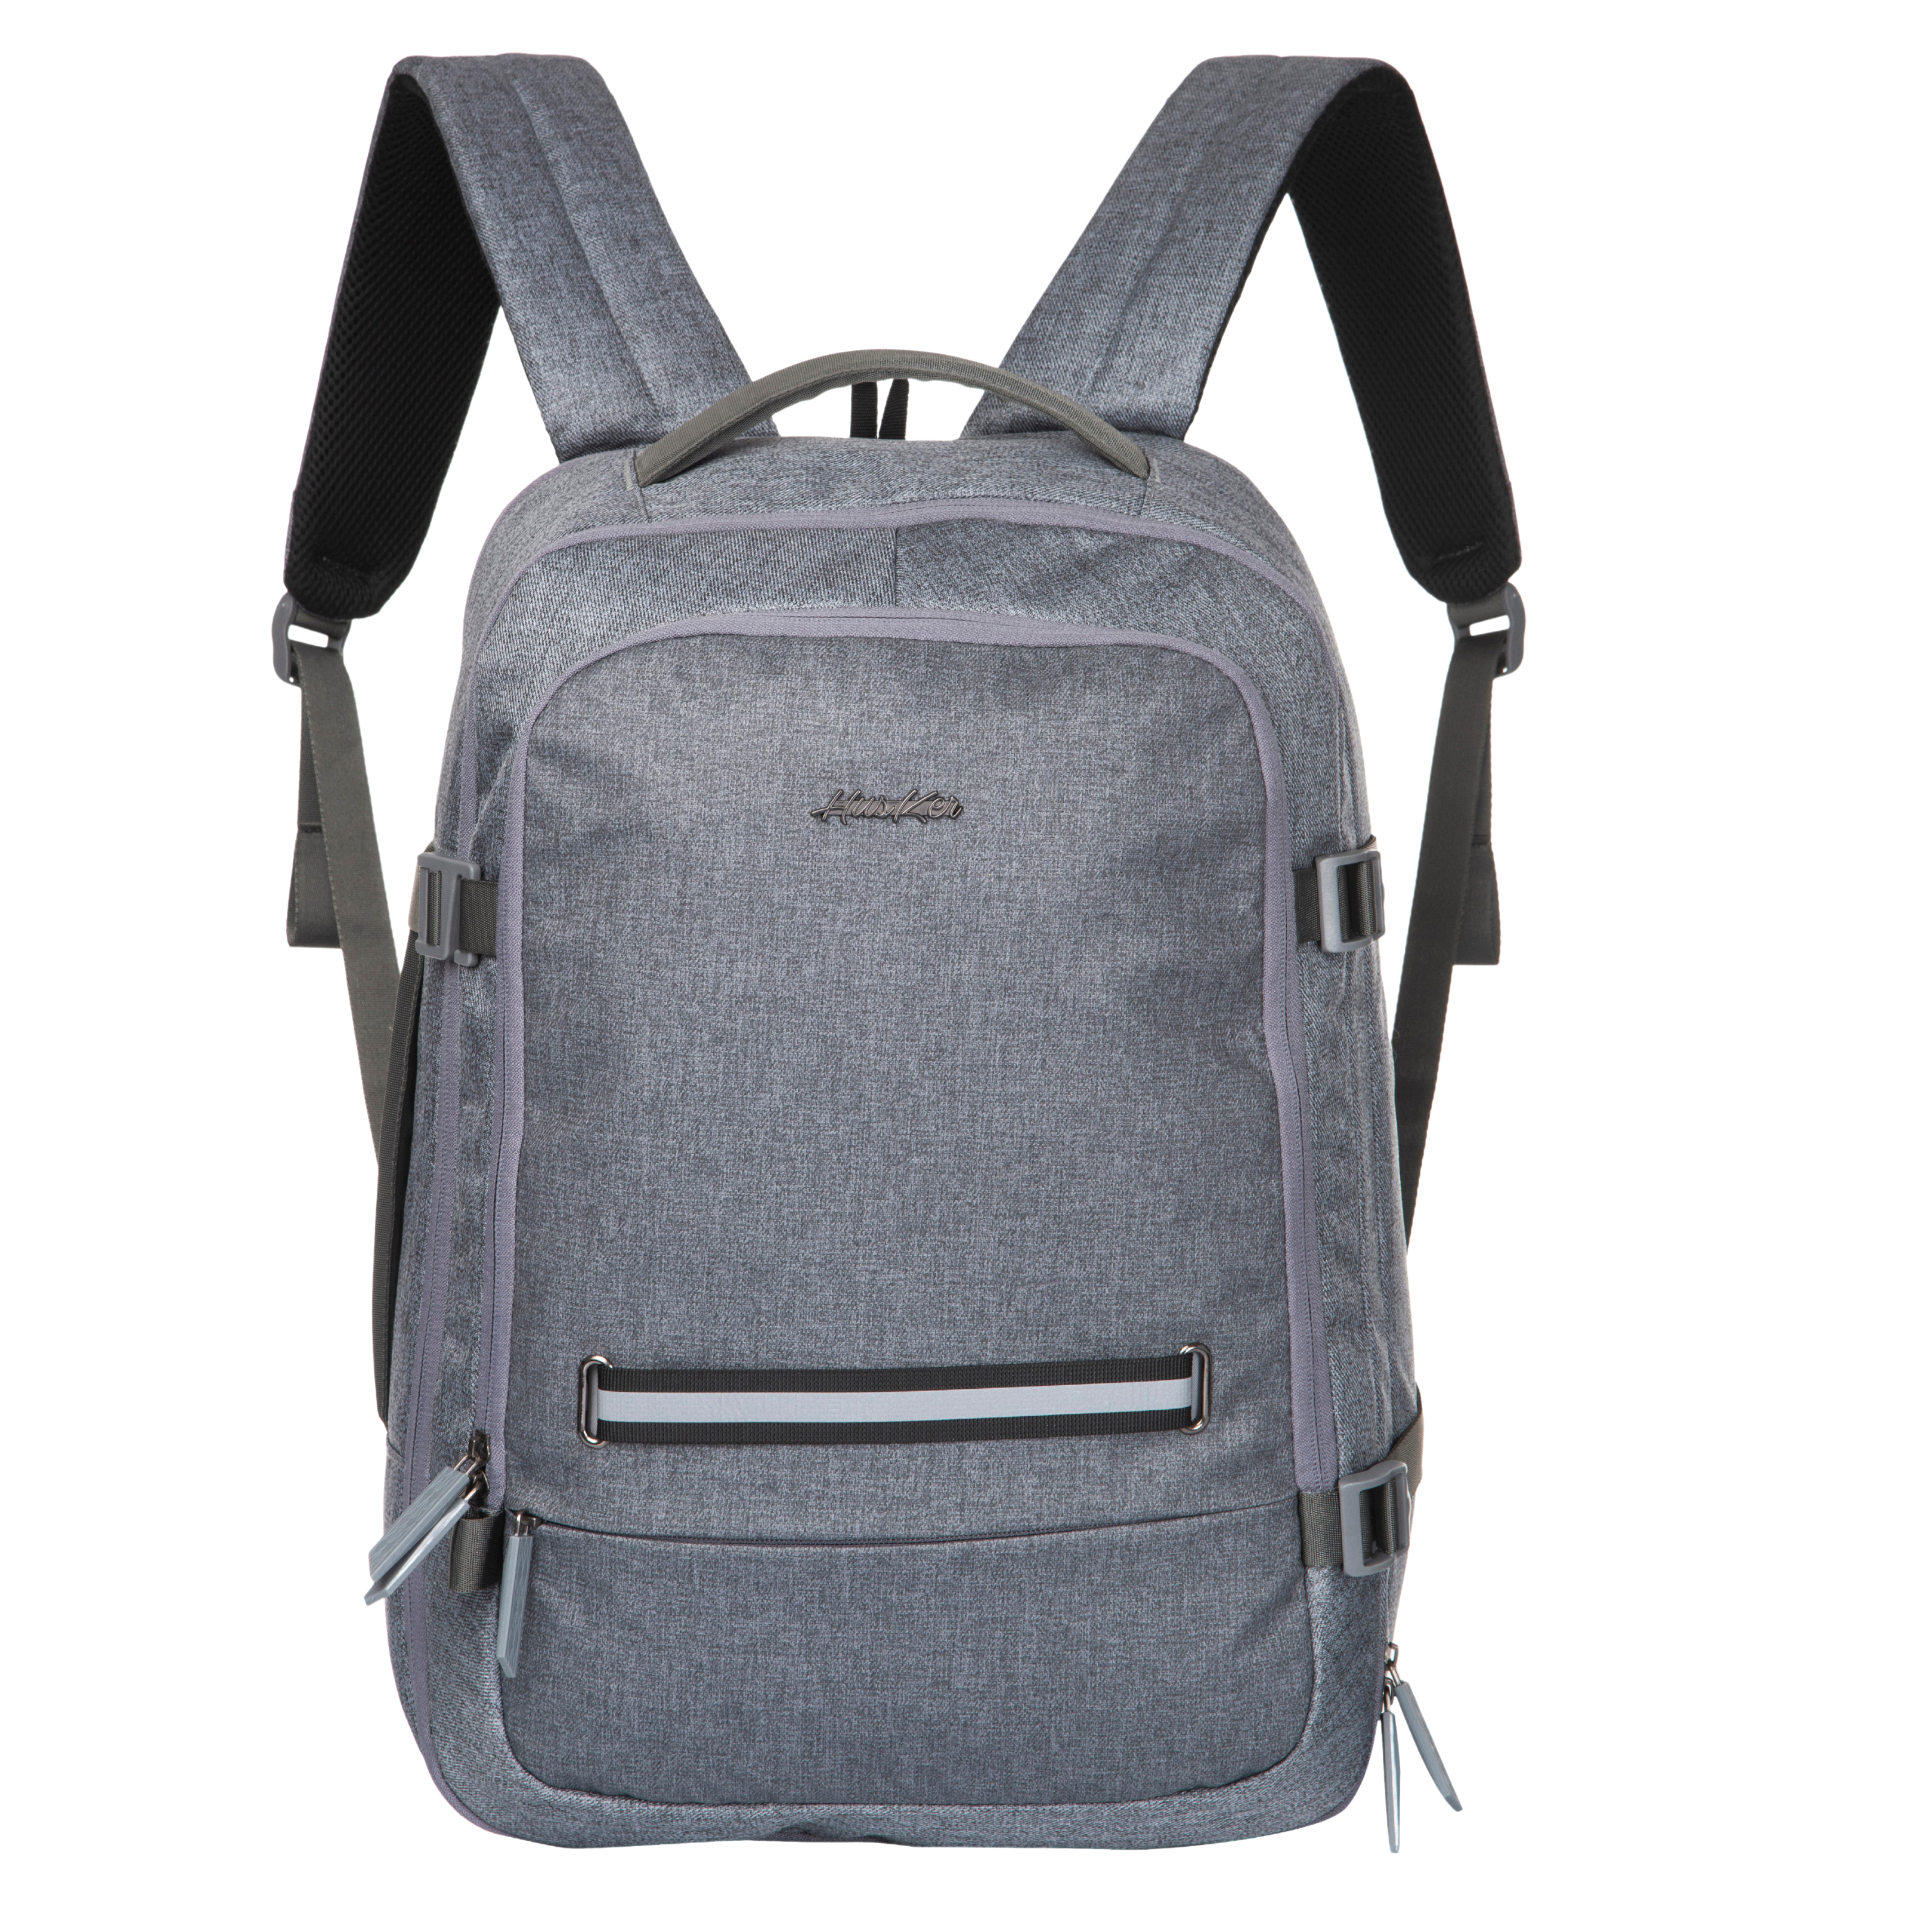 Aesthetic striped canvas fabric backpack (grey) in Delhi at best price by  Jr Bag Company - Justdial